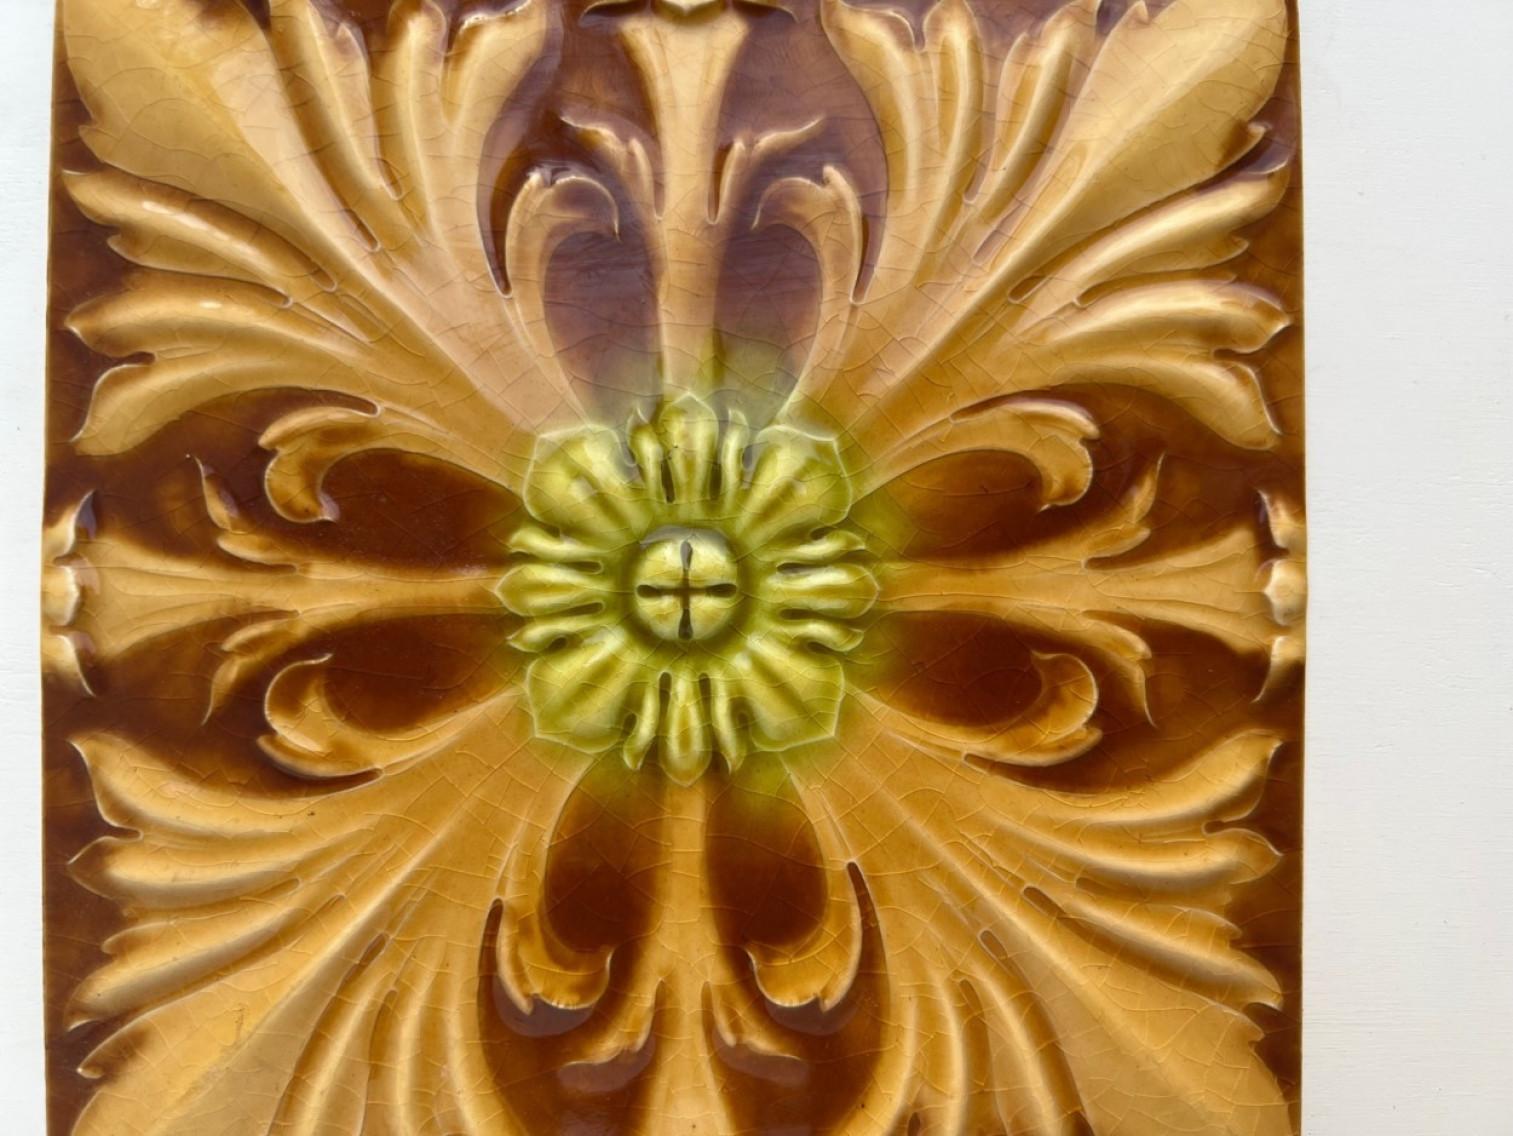 1 of the 60 handmade tiles in rich brown and yellow glazed colors. Manufactured around 1920 by Gilliot Hemiksem, Belgium.
These tiles would be charming displayed on easels, framed or incorporated into a custom tile design.

Please note that the